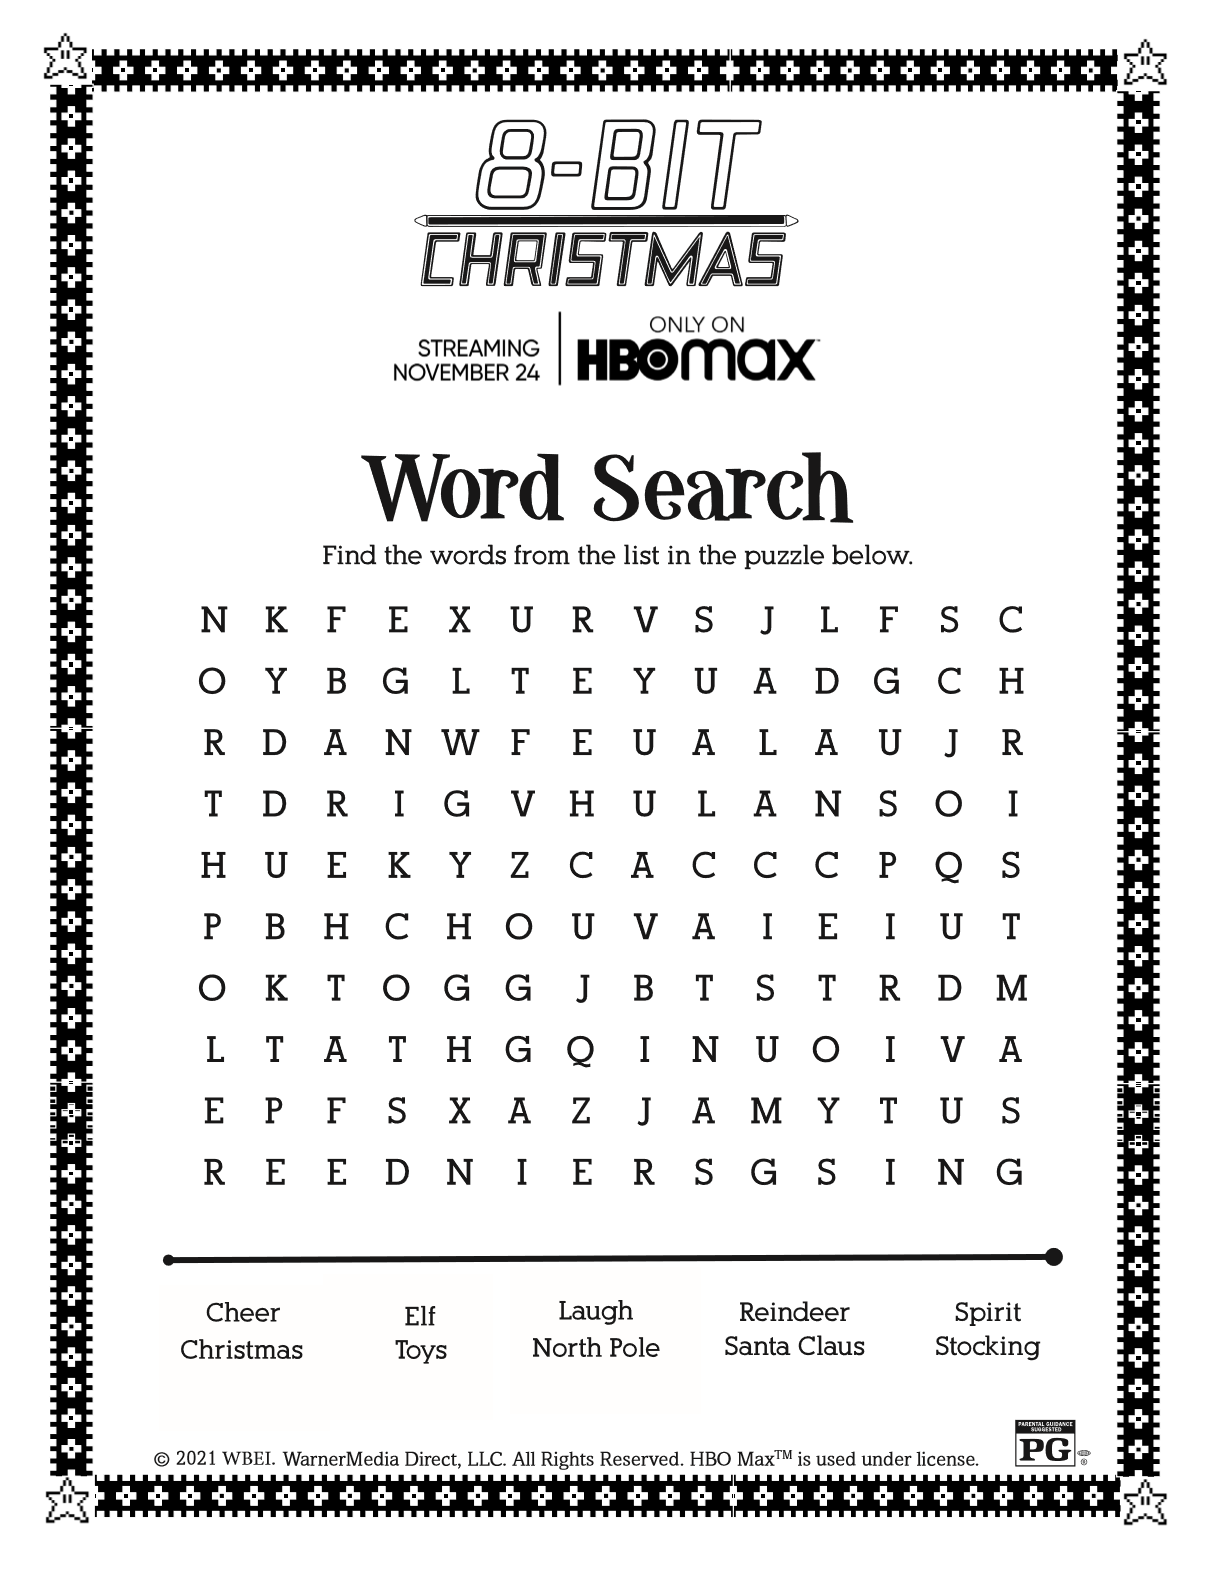 8-bit christmas word search activity page